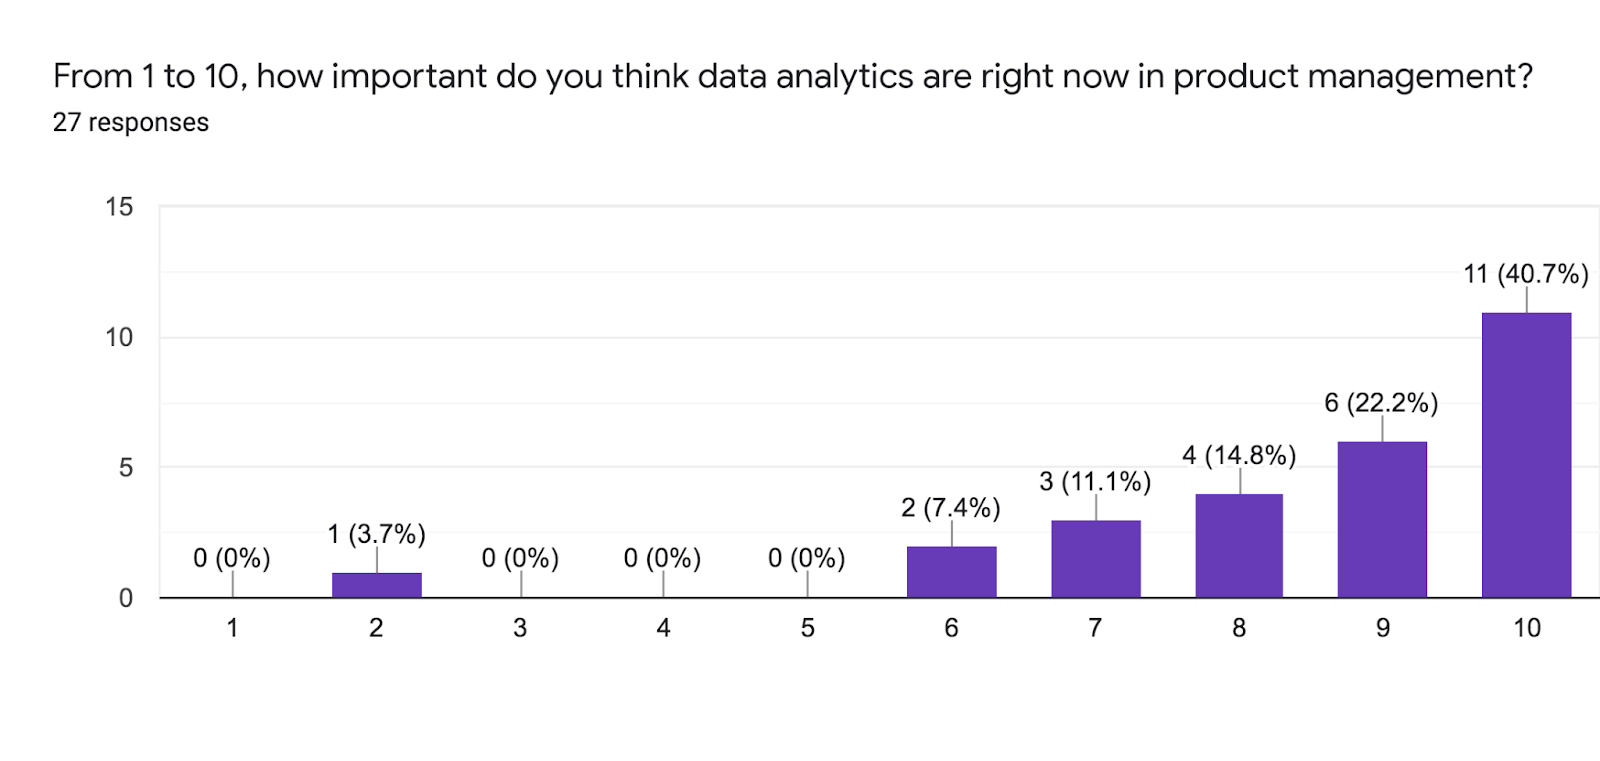 Forms response chart. Question title: From 1 to 10, how important do you think data analytics are right now in product management?. Number of responses: 27 responses.